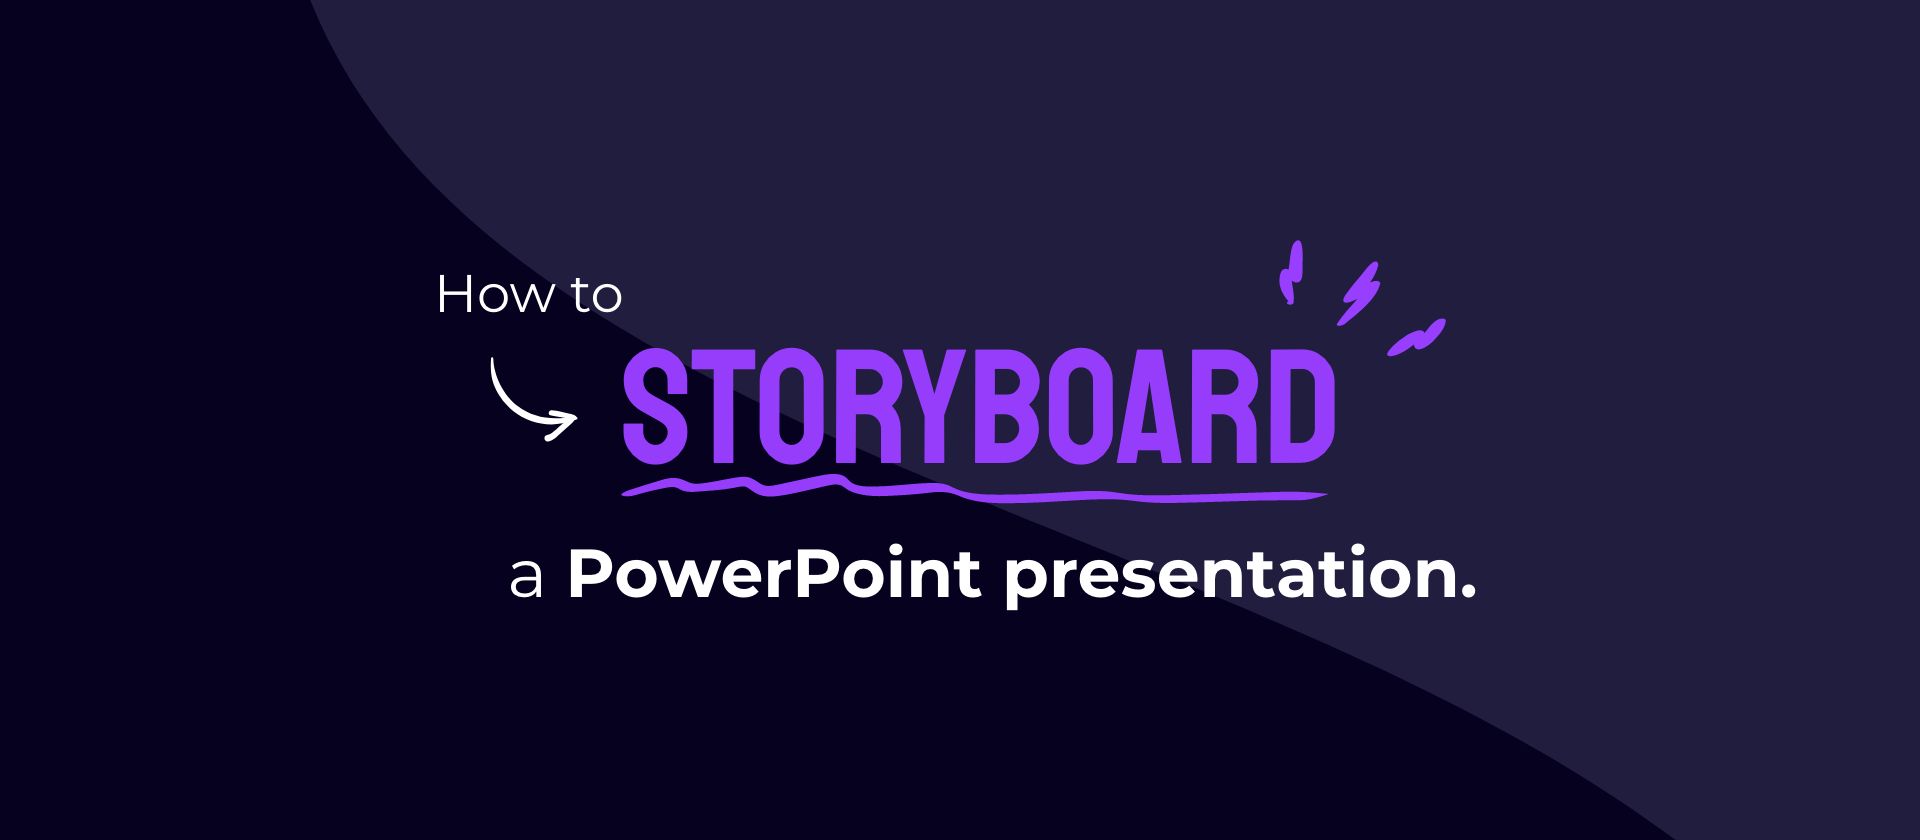 How to storyboard a PowerPoint presentation.